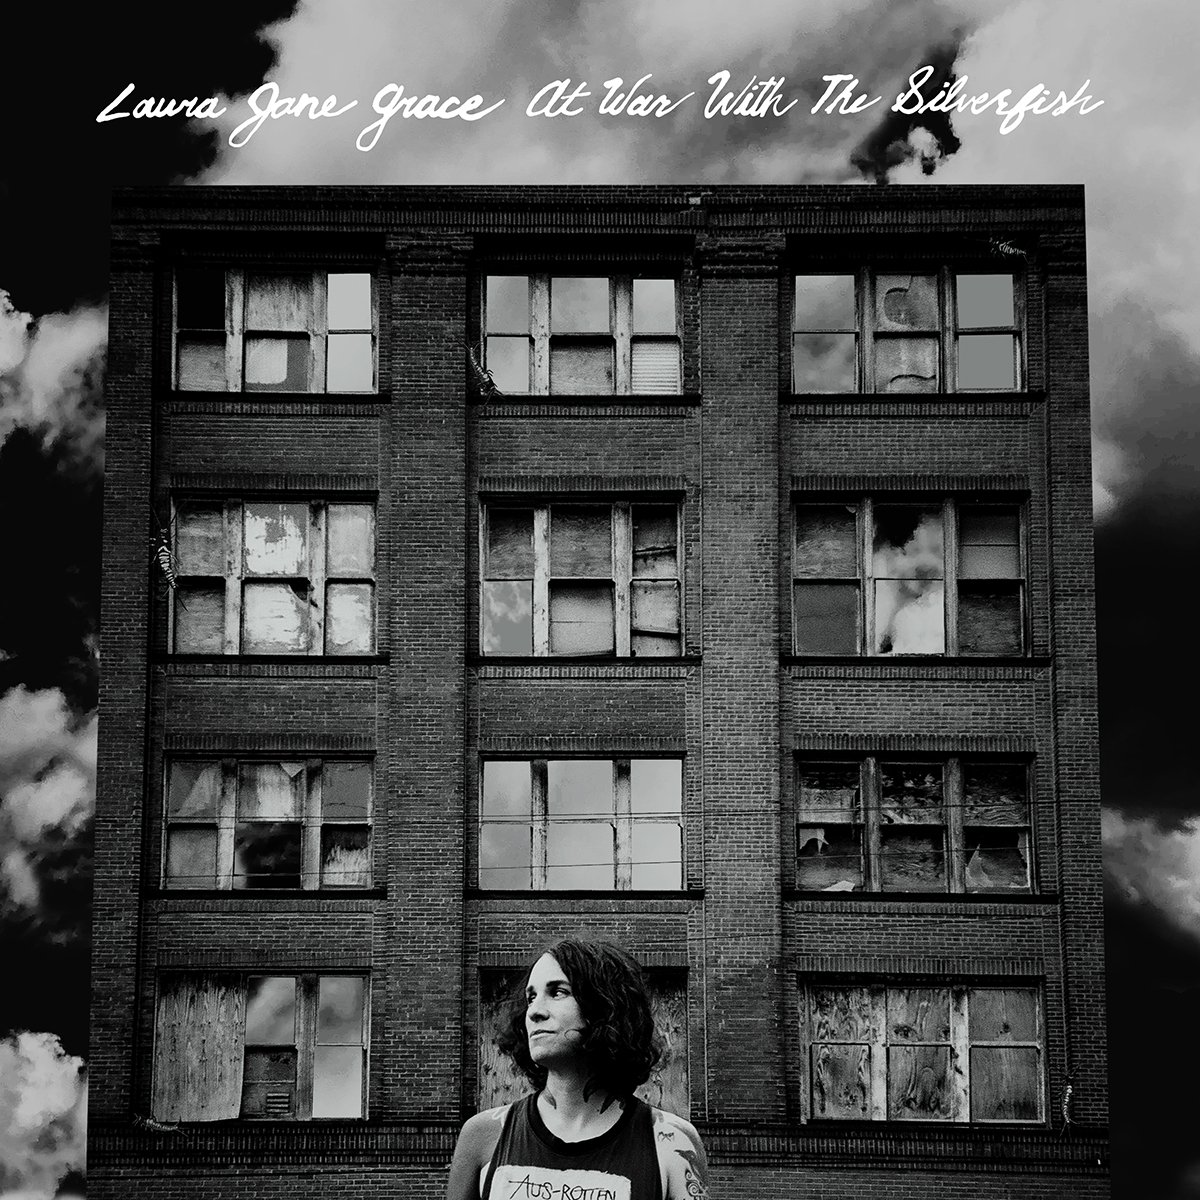 Laura Jane Grace - At War With The Silverfish (2021) Vinyl FLAC Download